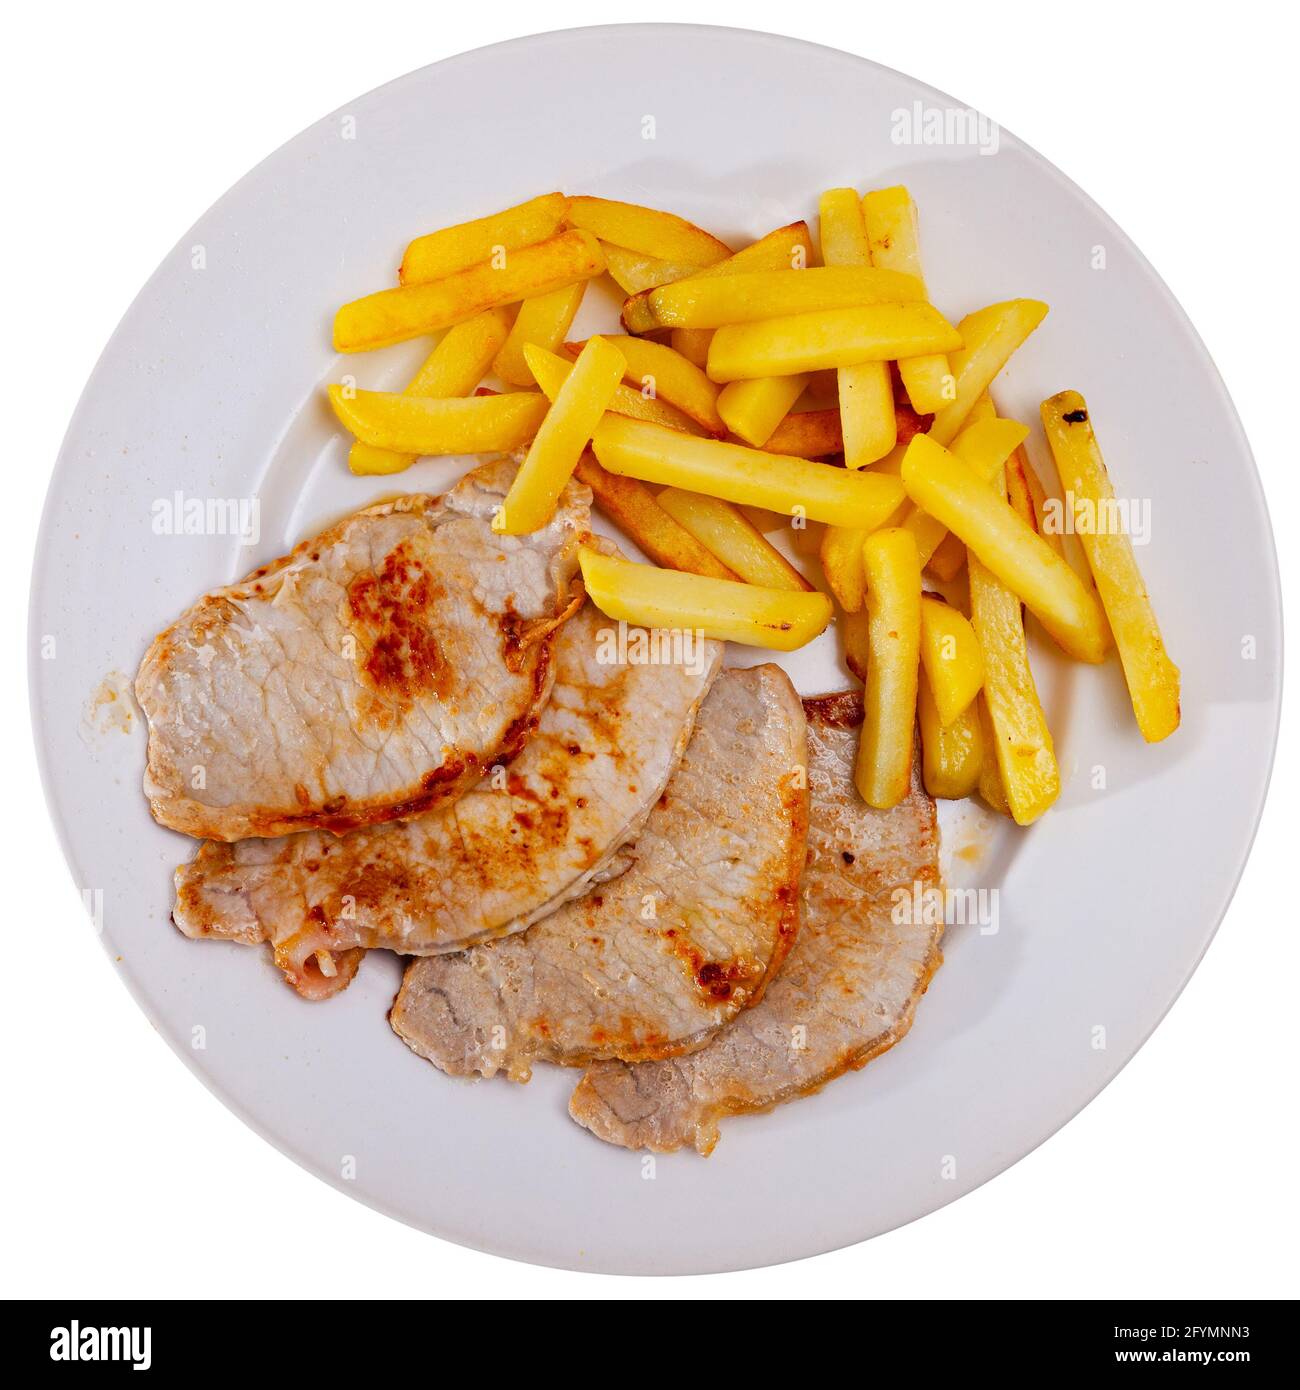 Roasted pork loin Lomo de cerdo con patata with potatoes fries on a ceramic plate. Isolated over white background Stock Photo